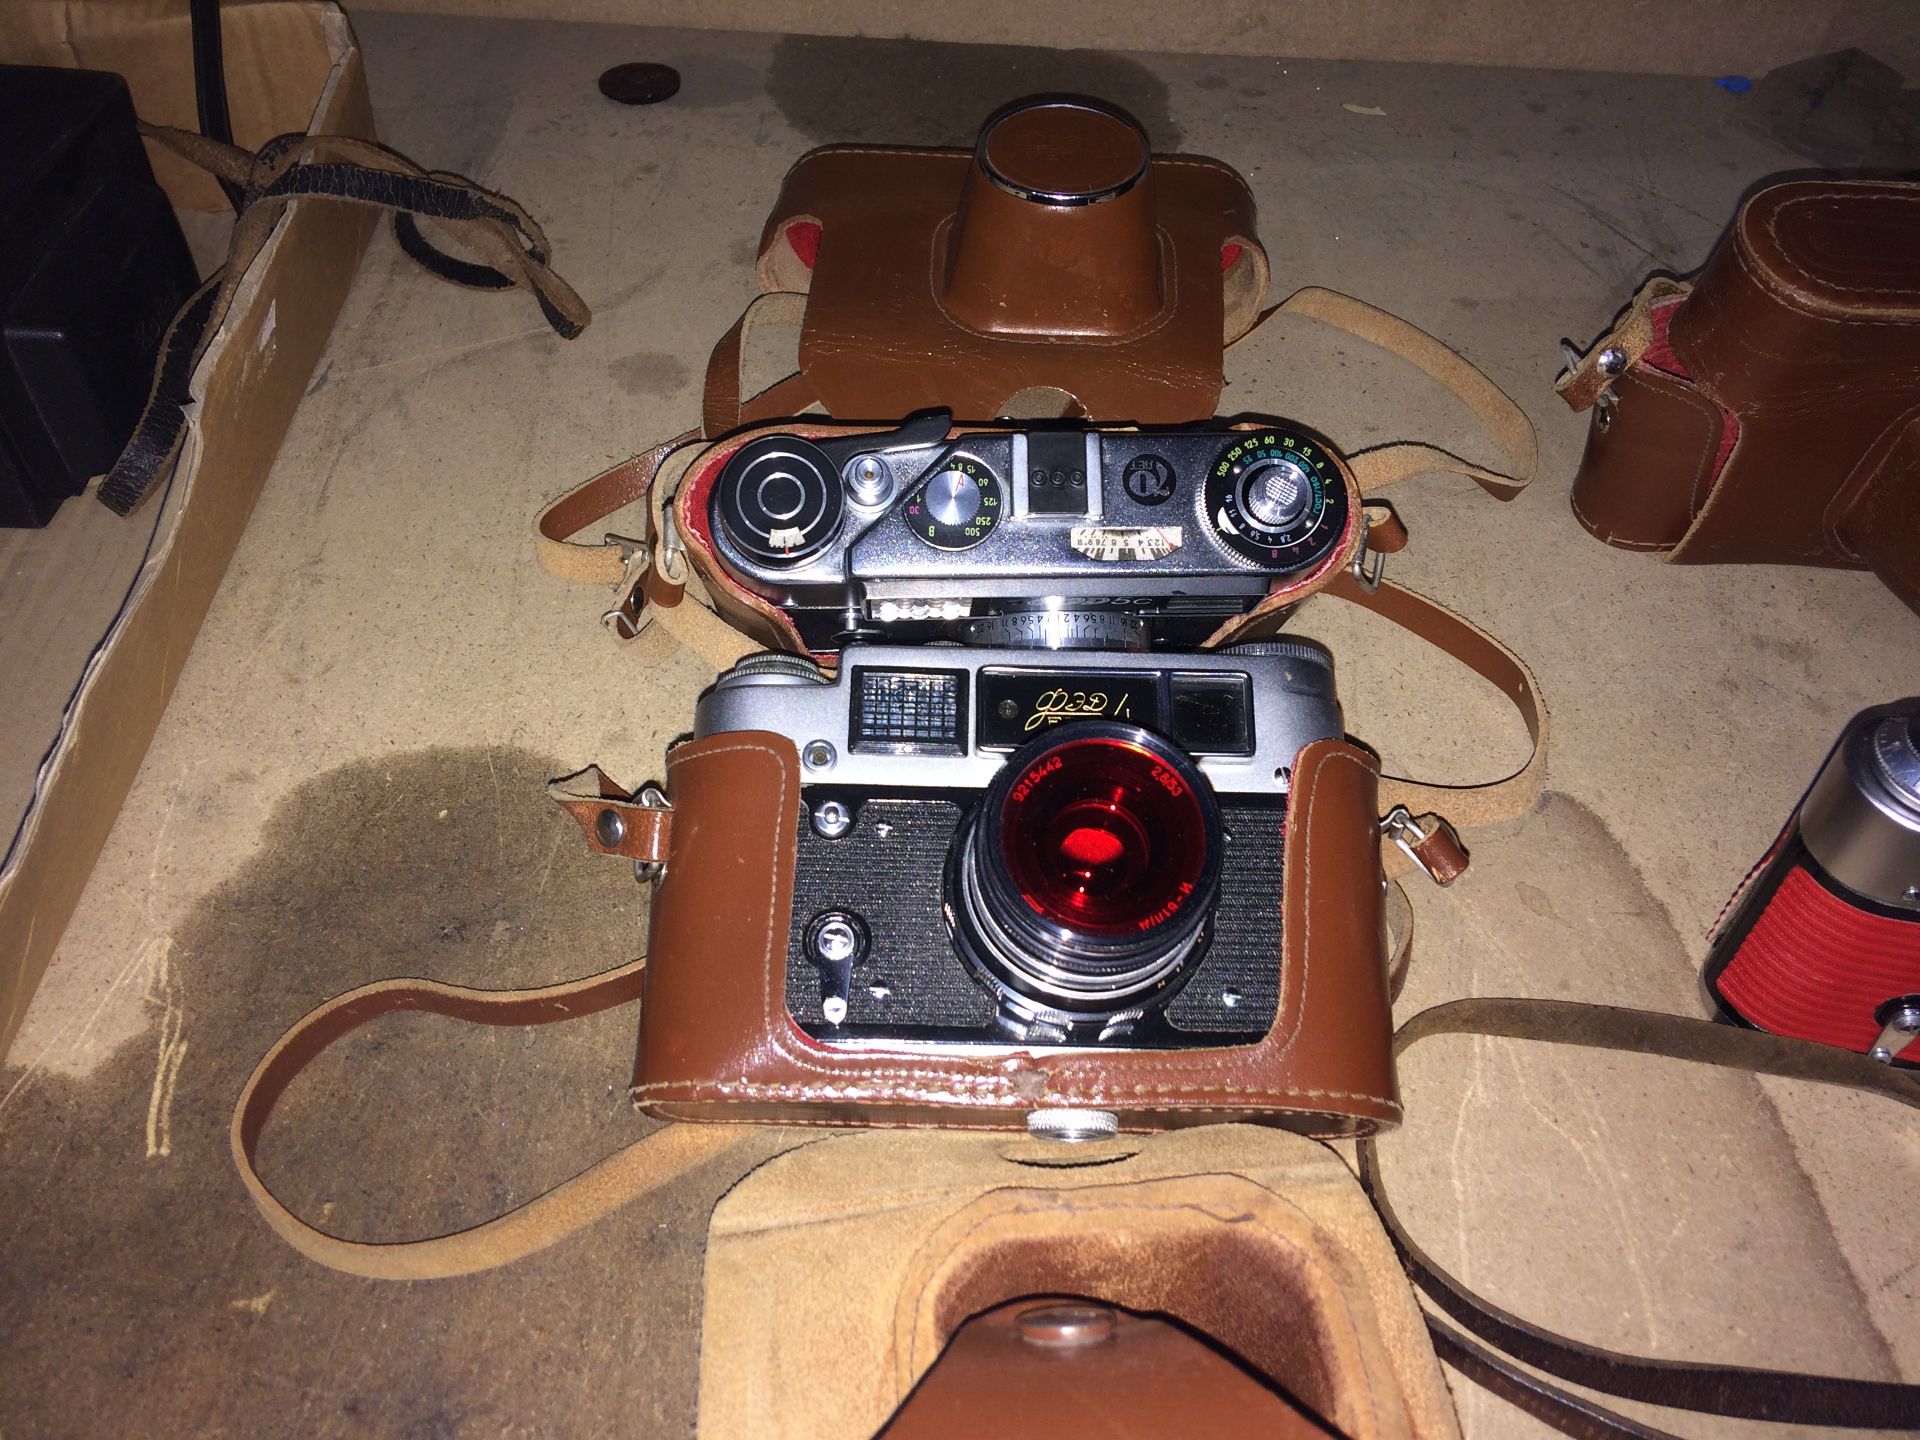 2 x items - FED QED 5C camera with leather case and a FED QED 4 camera with leather case